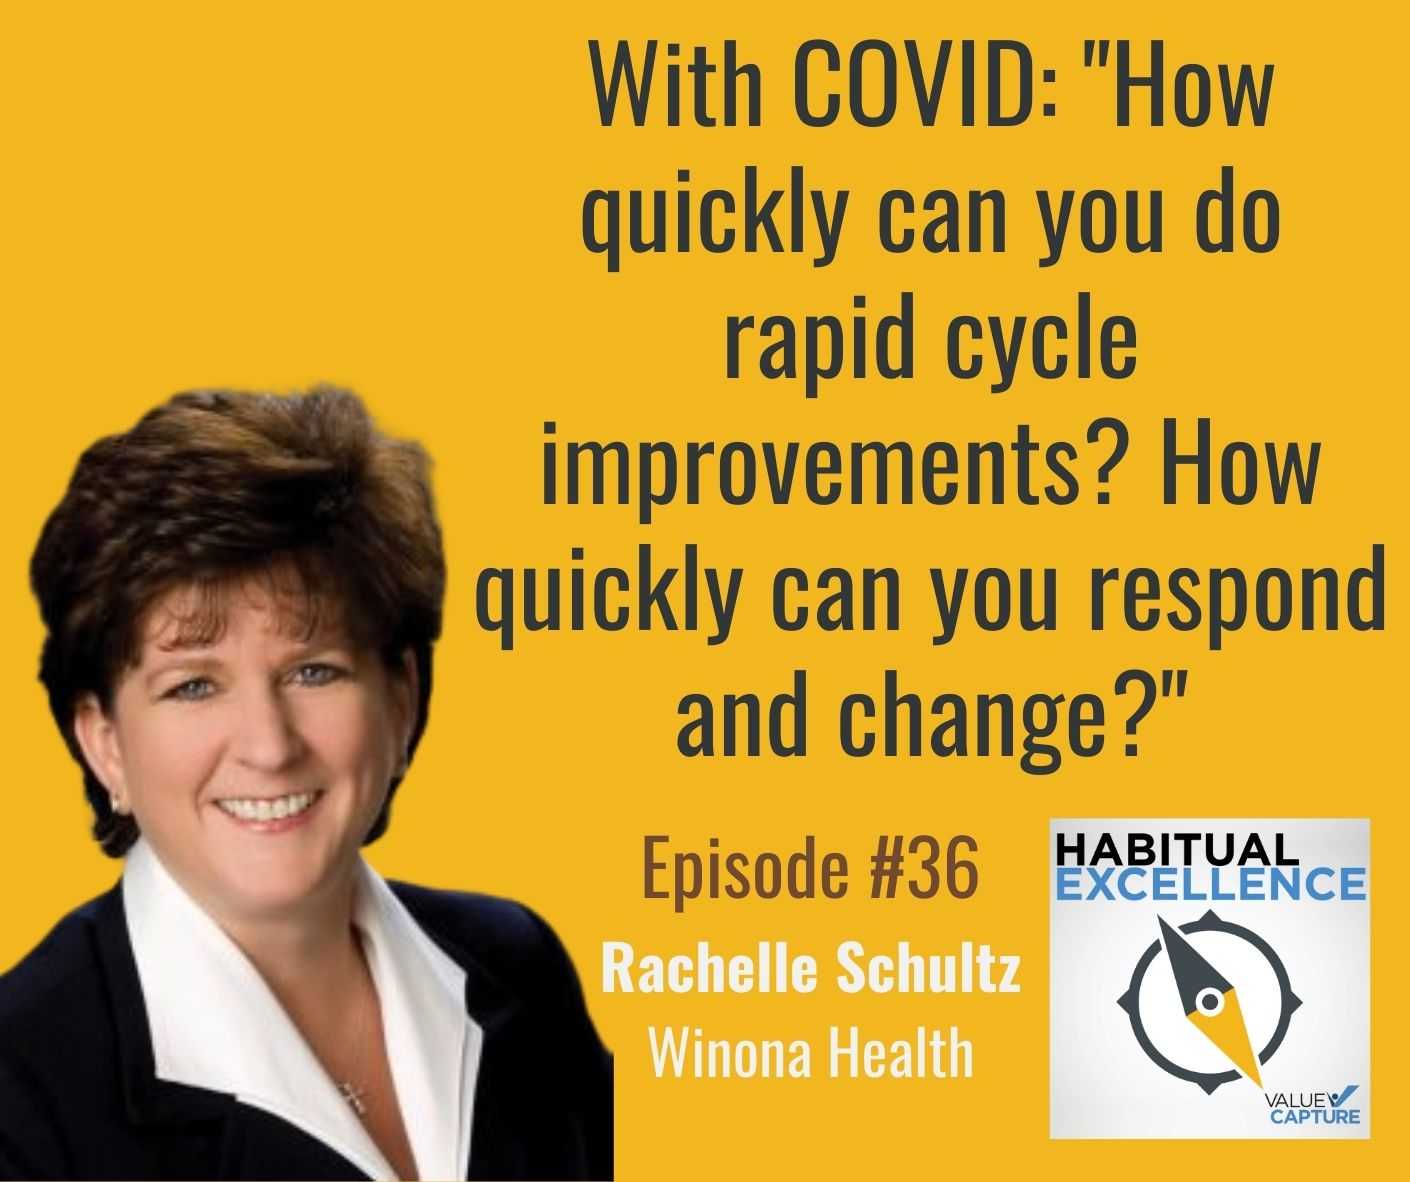 With COVID: "How quickly can you do rapid cycle improvements? How quickly can you respond and change?"